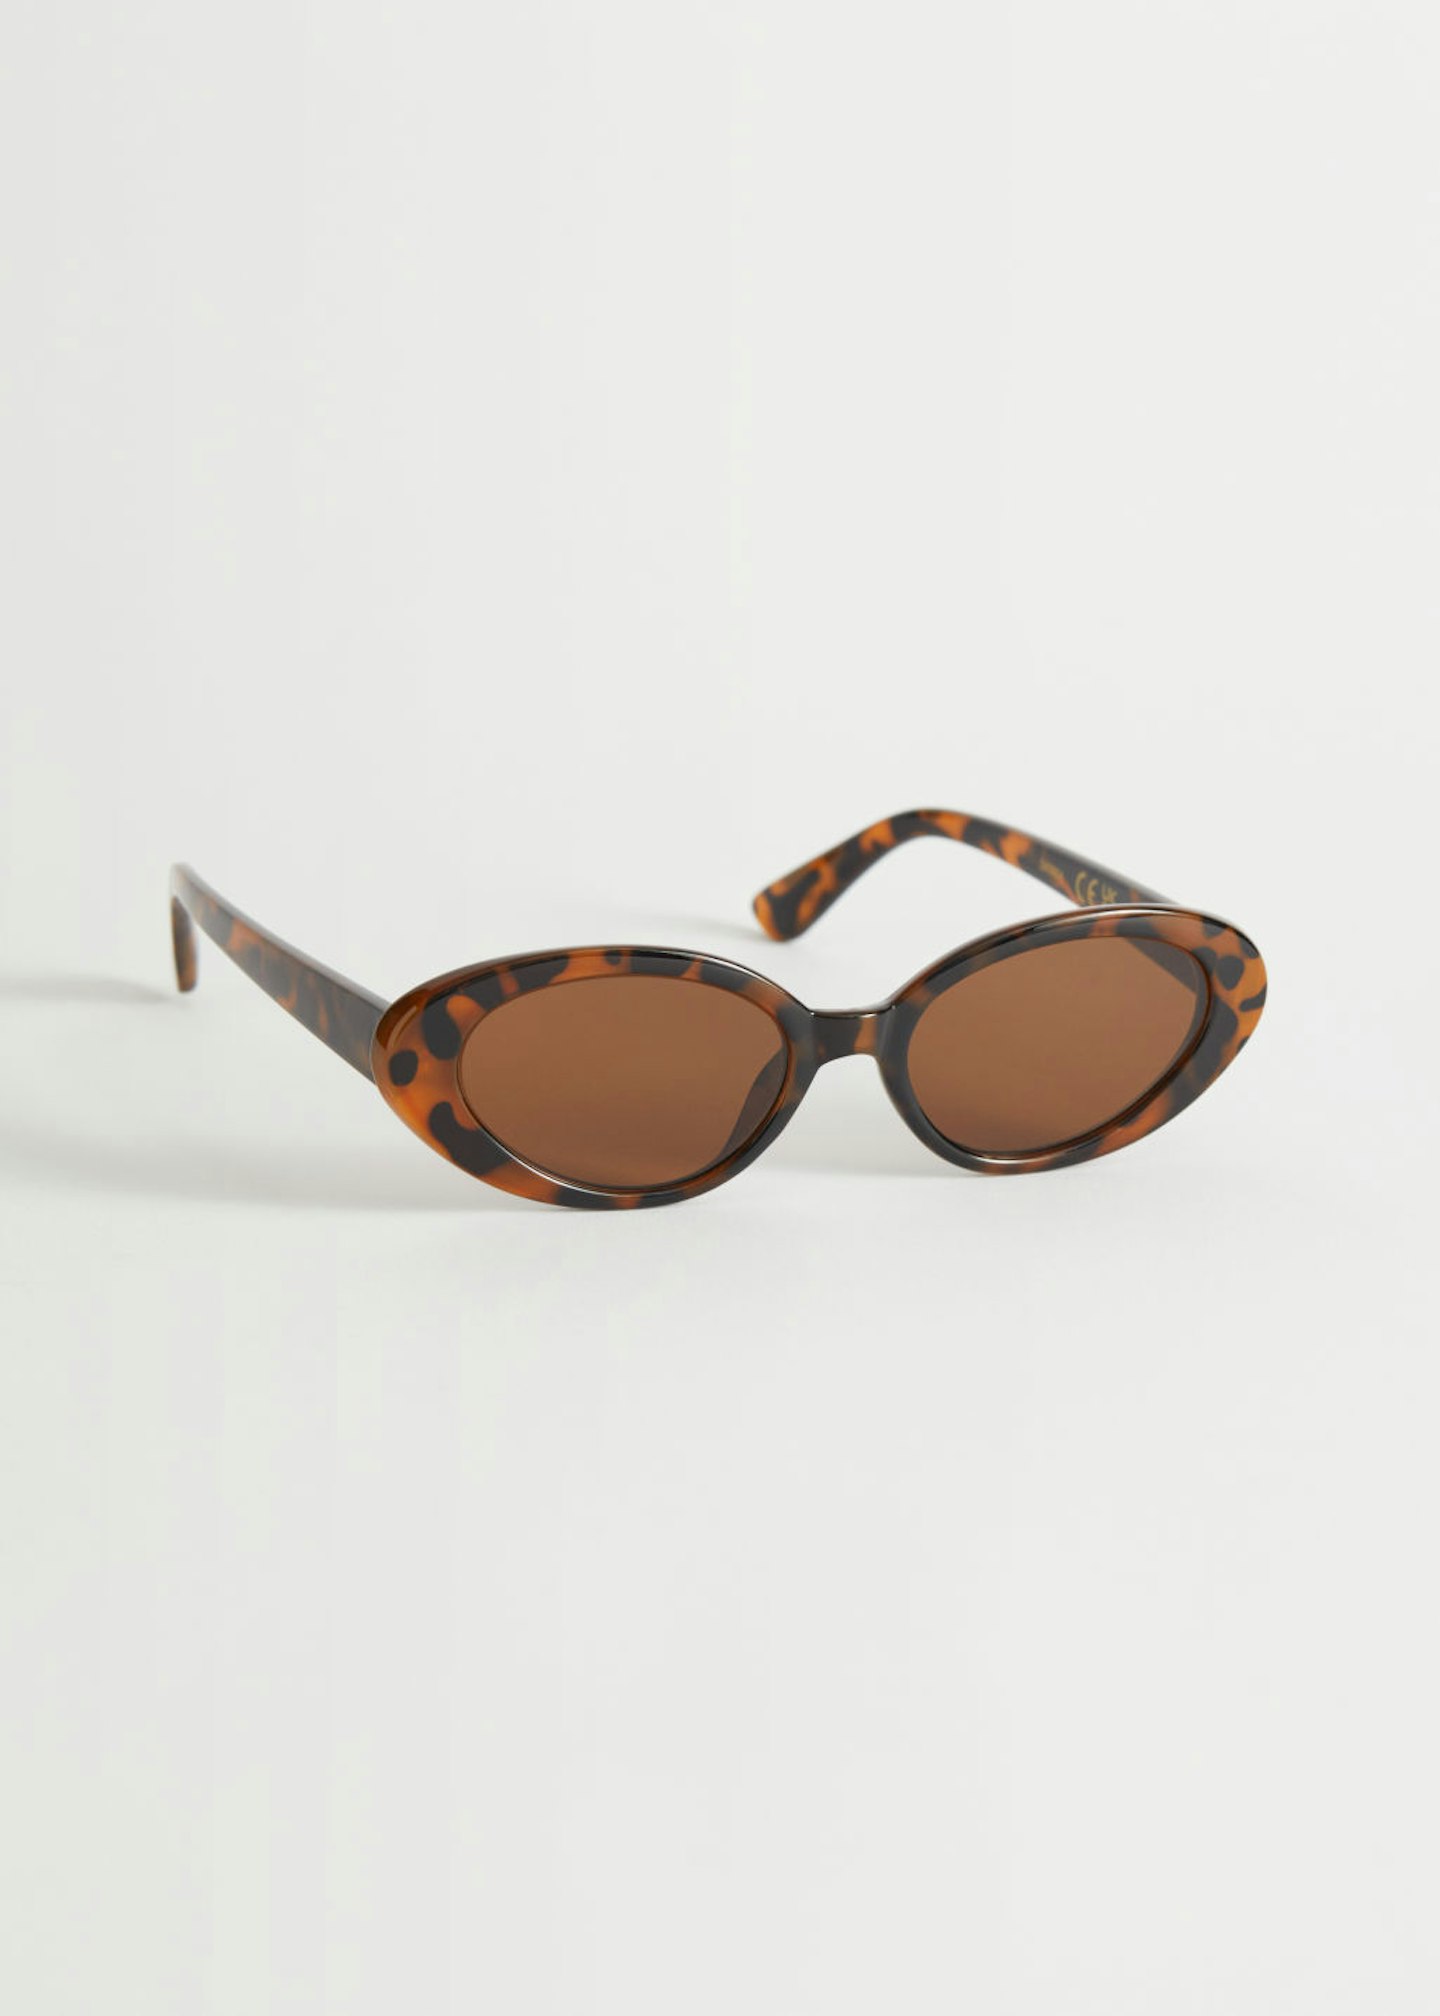 & Other Stories, Oval Sunglasses